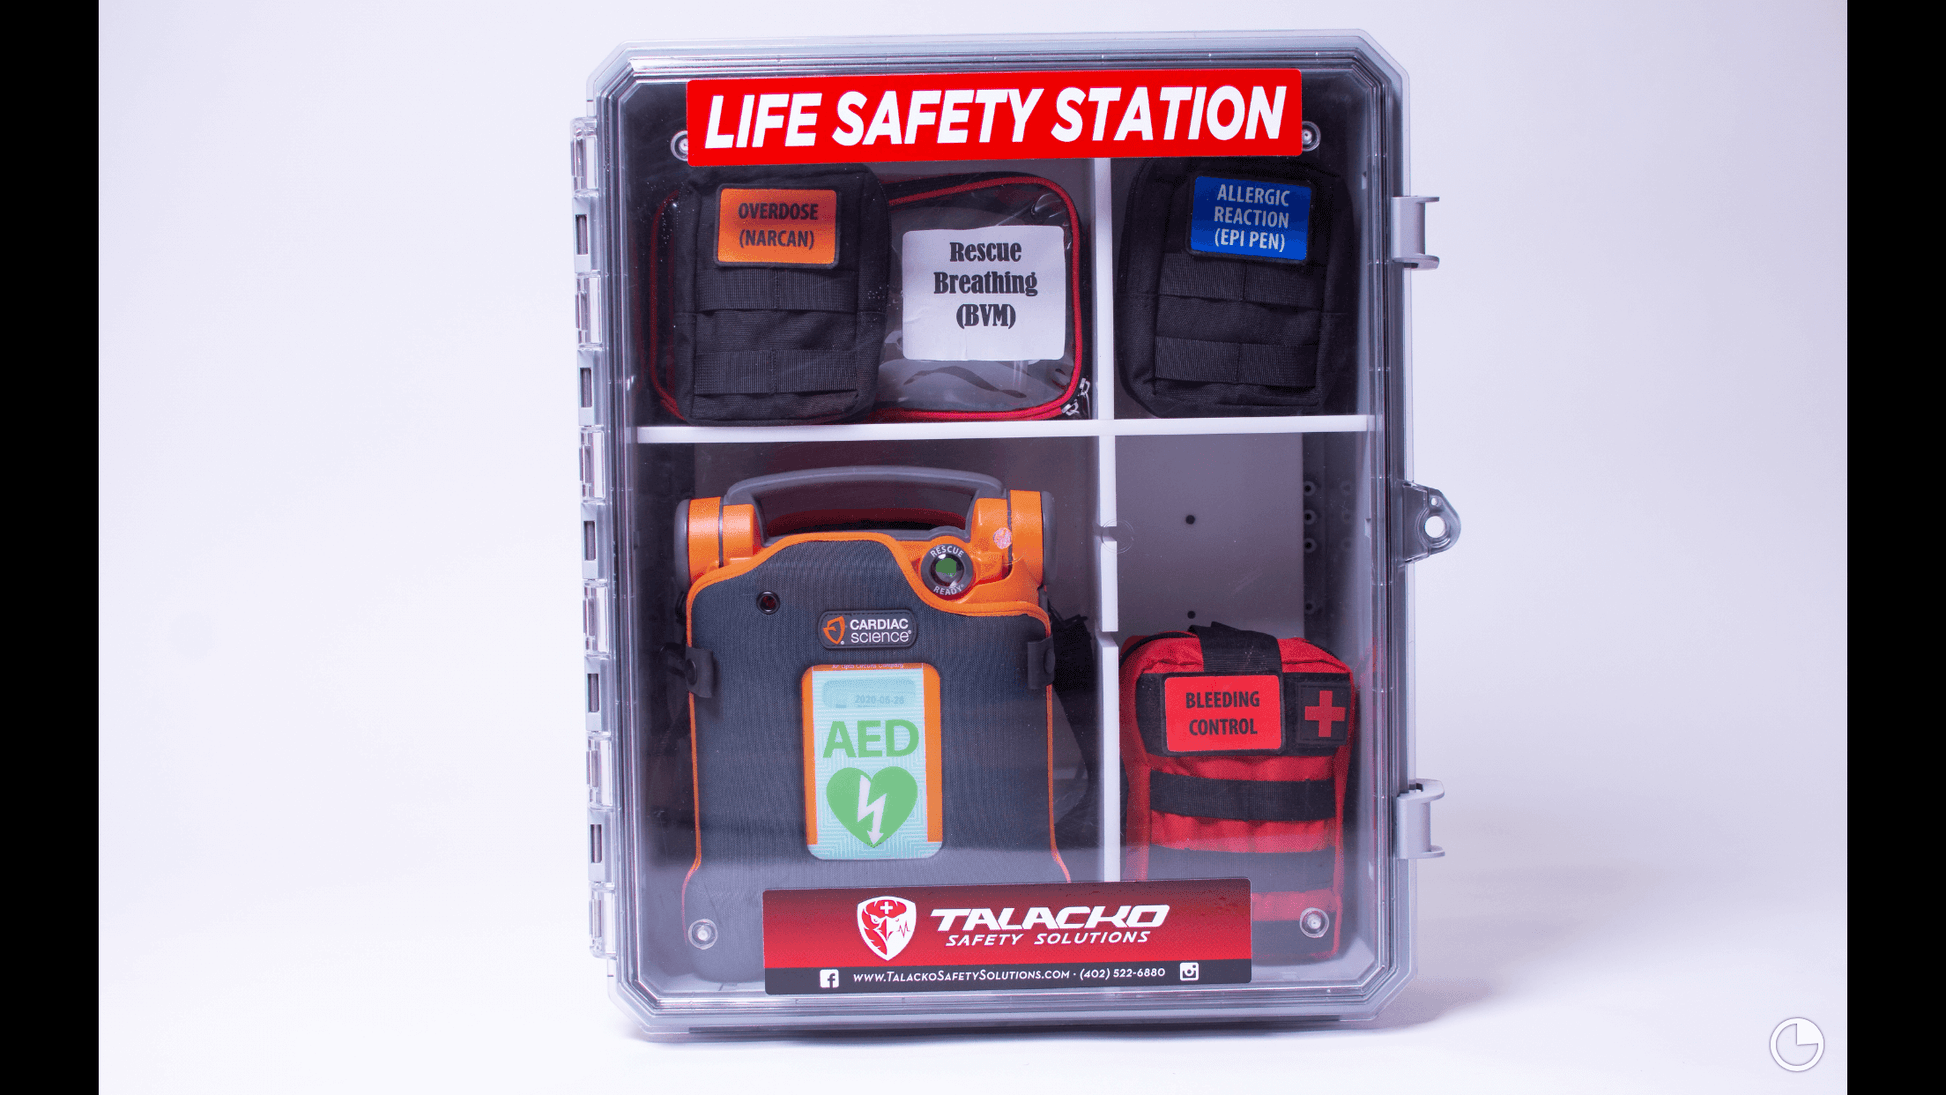 Life Safety Station, one enclosure with adjustable shelves